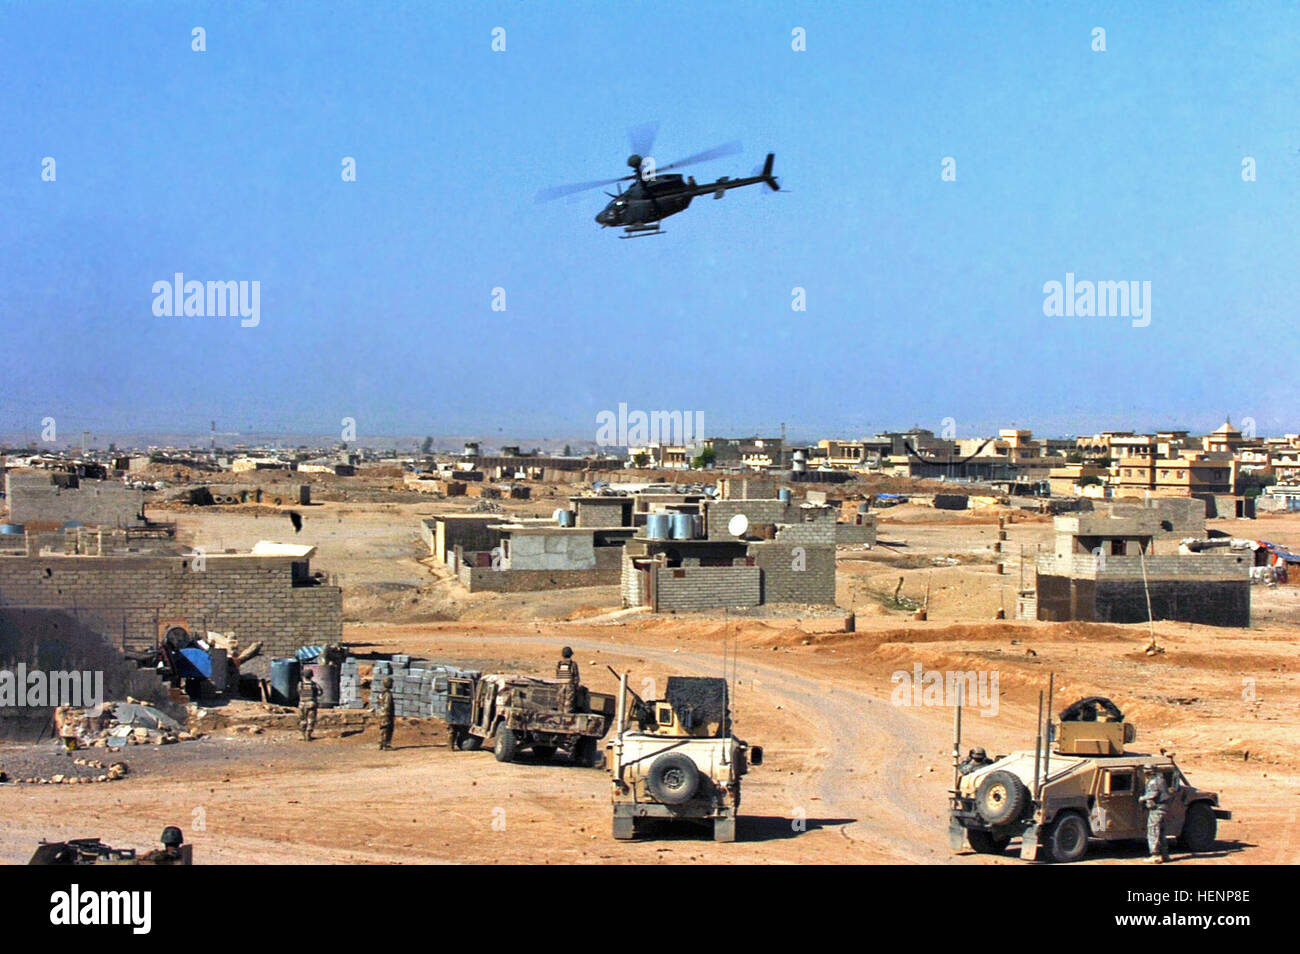 An OH-58 Kiowa helicopter moves in to support a joint Iraqi Army and Coalition Forces raid after small-arms fire is heard nearby in Mosul, Iraq, April 17. IA, CF raids on Mosul builds bonds between Armies 85260 Stock Photo